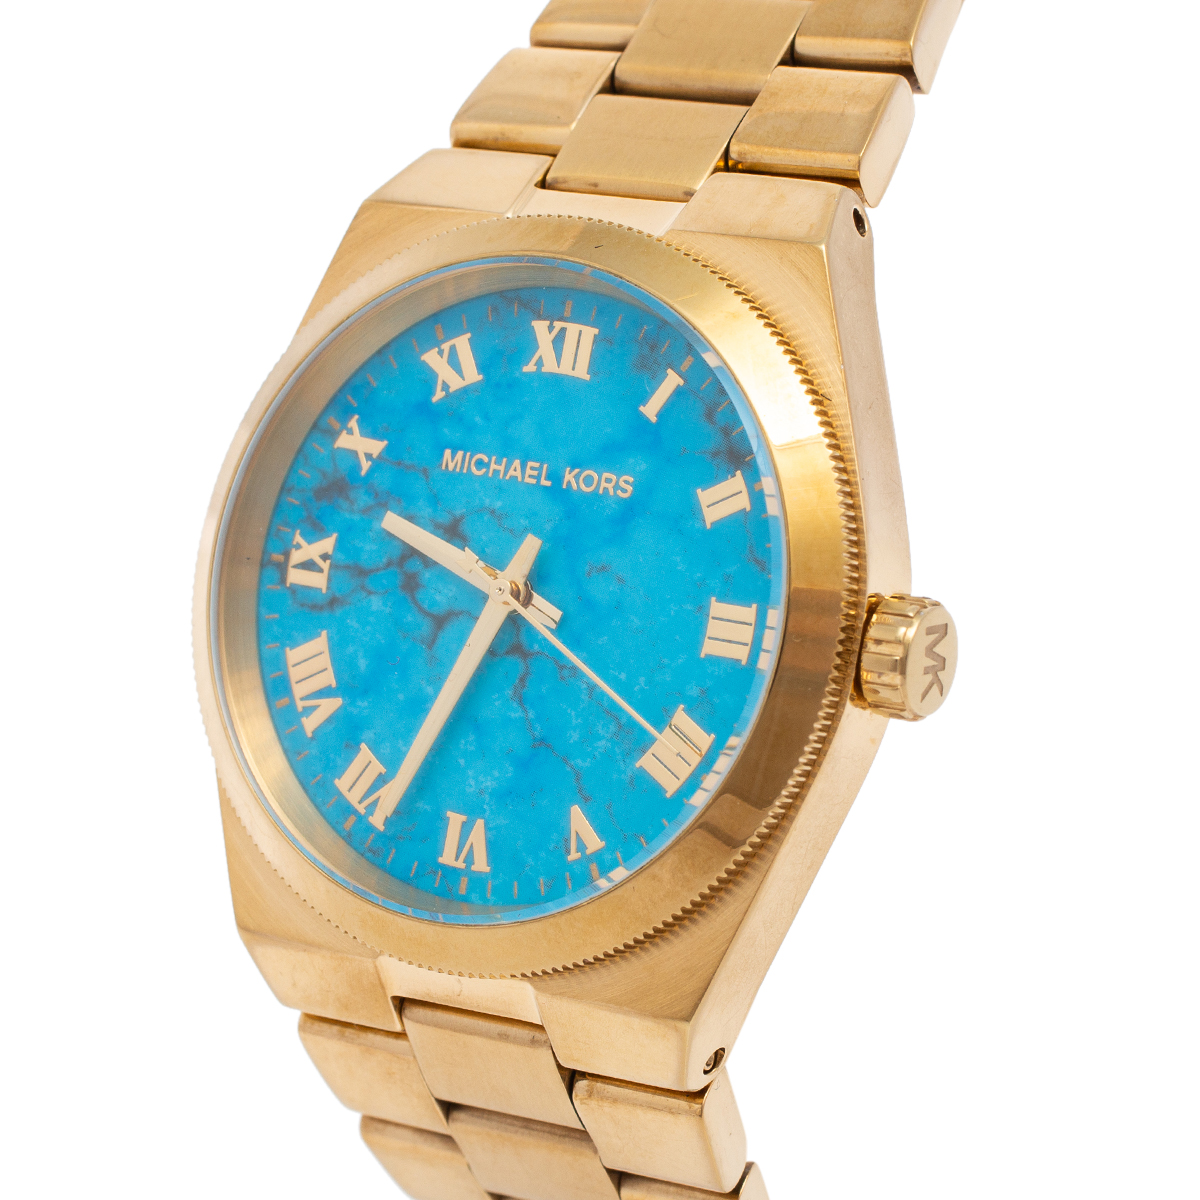 

Michael Kors Turquoise Gold Plated Stainless Steel Channing MK5894 Women's Wristwatch, Blue